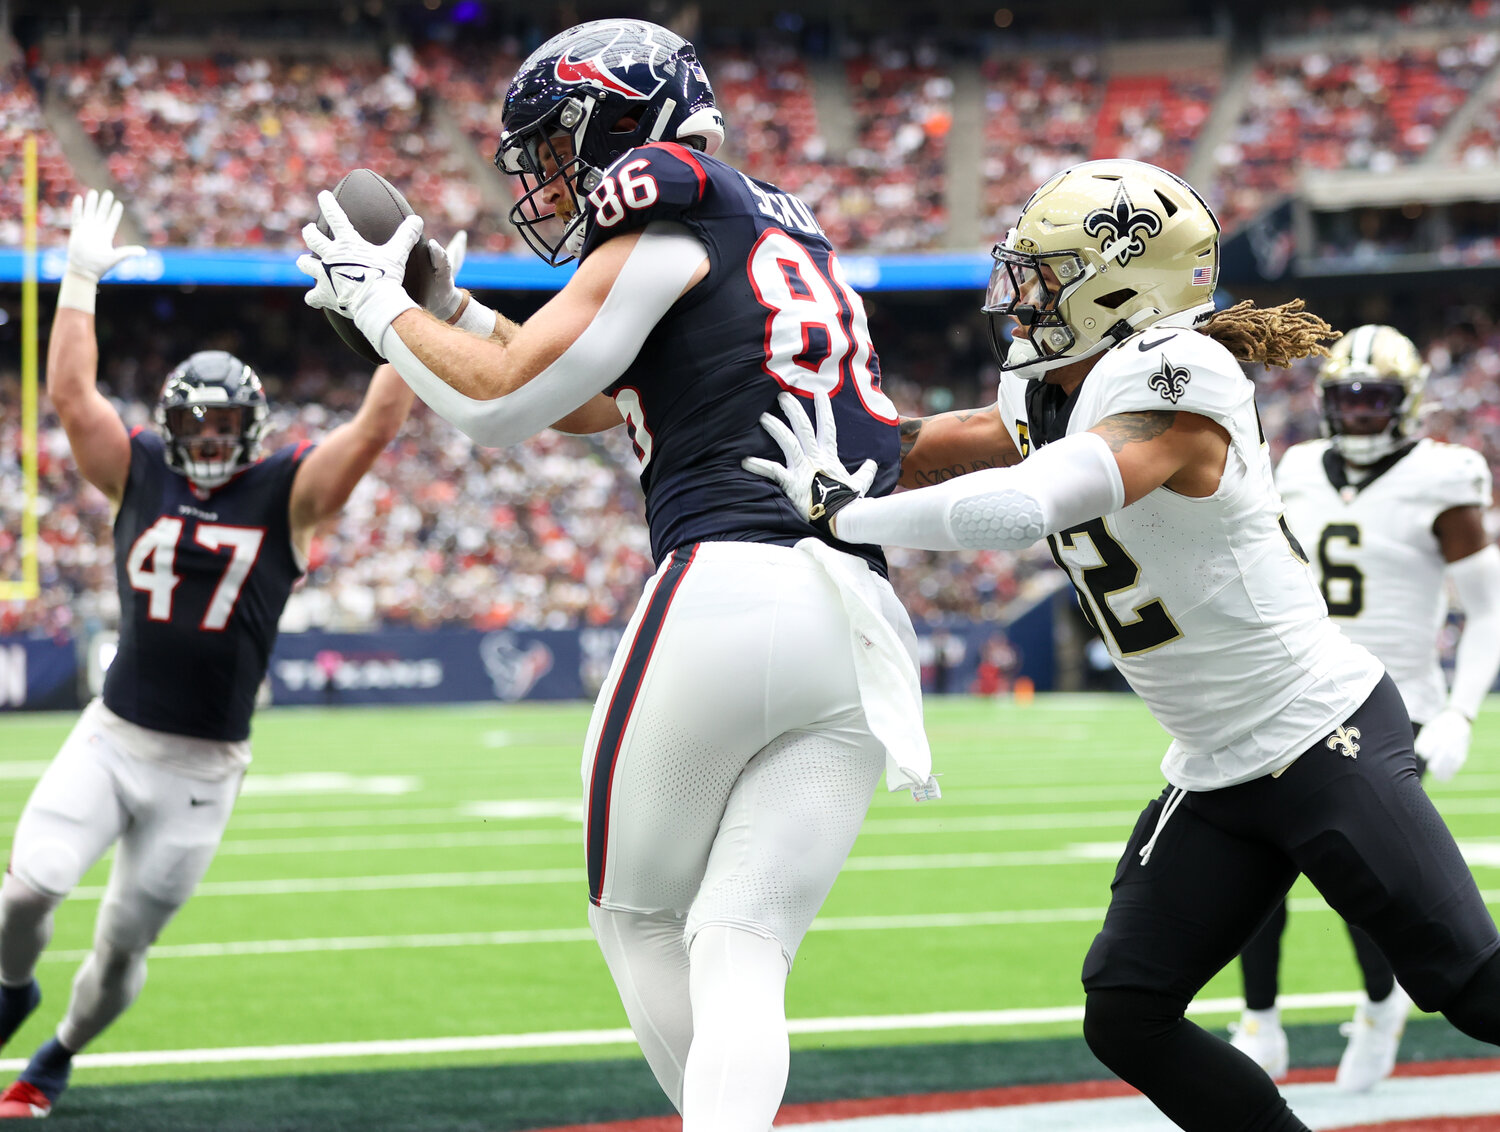 Texans tight end Dalton Schultz (86) makes a touchdown catch during an NFL game between the Texans and the Saints on October 15, 2023 in Houston. The Texans won, 20-13.